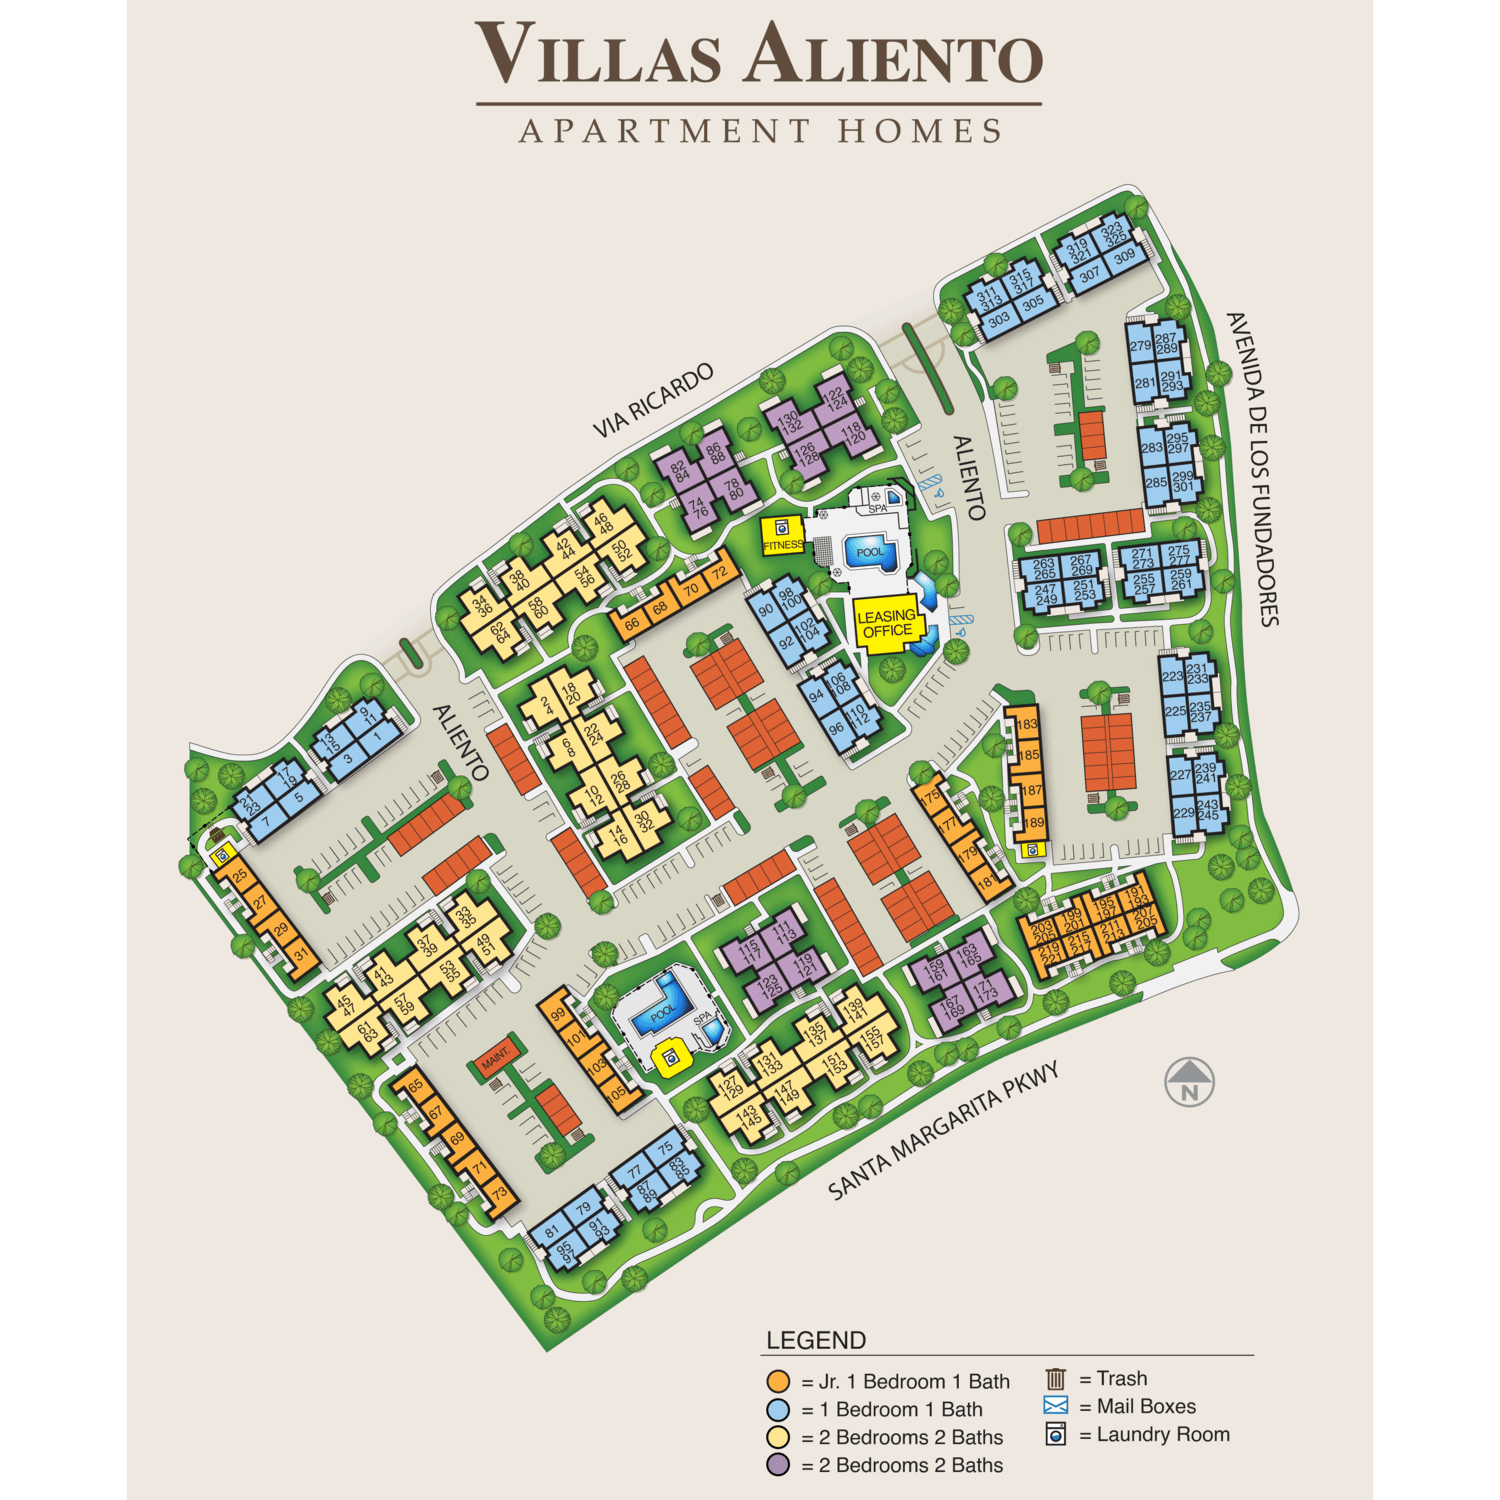 Located between Av. de las Flores and Santa Margarita Pkwy, this community features a clubhouse, pools, and fitness center.